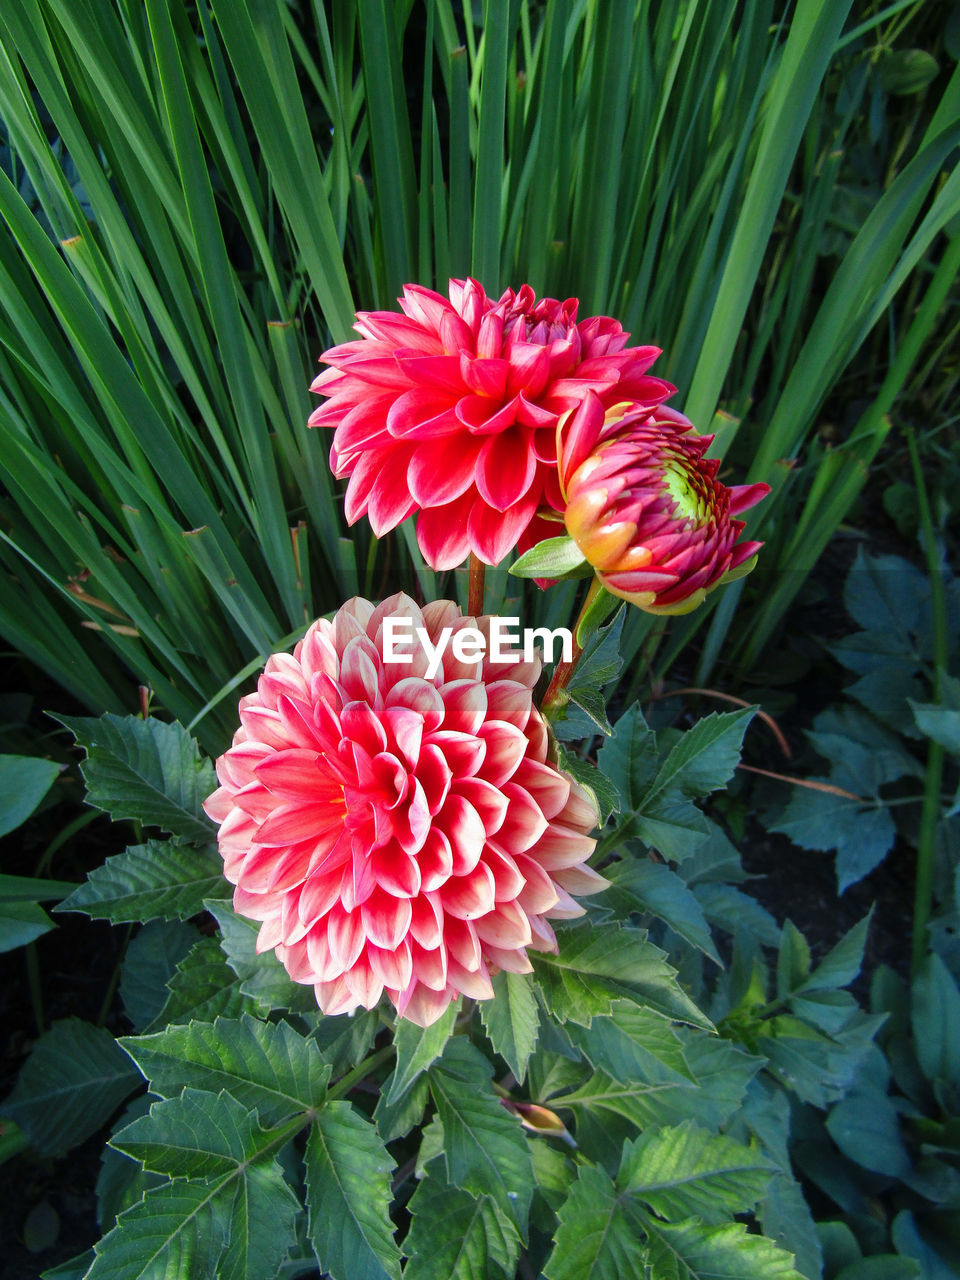 plant, flower, flowering plant, beauty in nature, freshness, petal, leaf, plant part, growth, fragility, flower head, inflorescence, nature, close-up, green, dahlia, pink, no people, red, botany, day, outdoors, high angle view